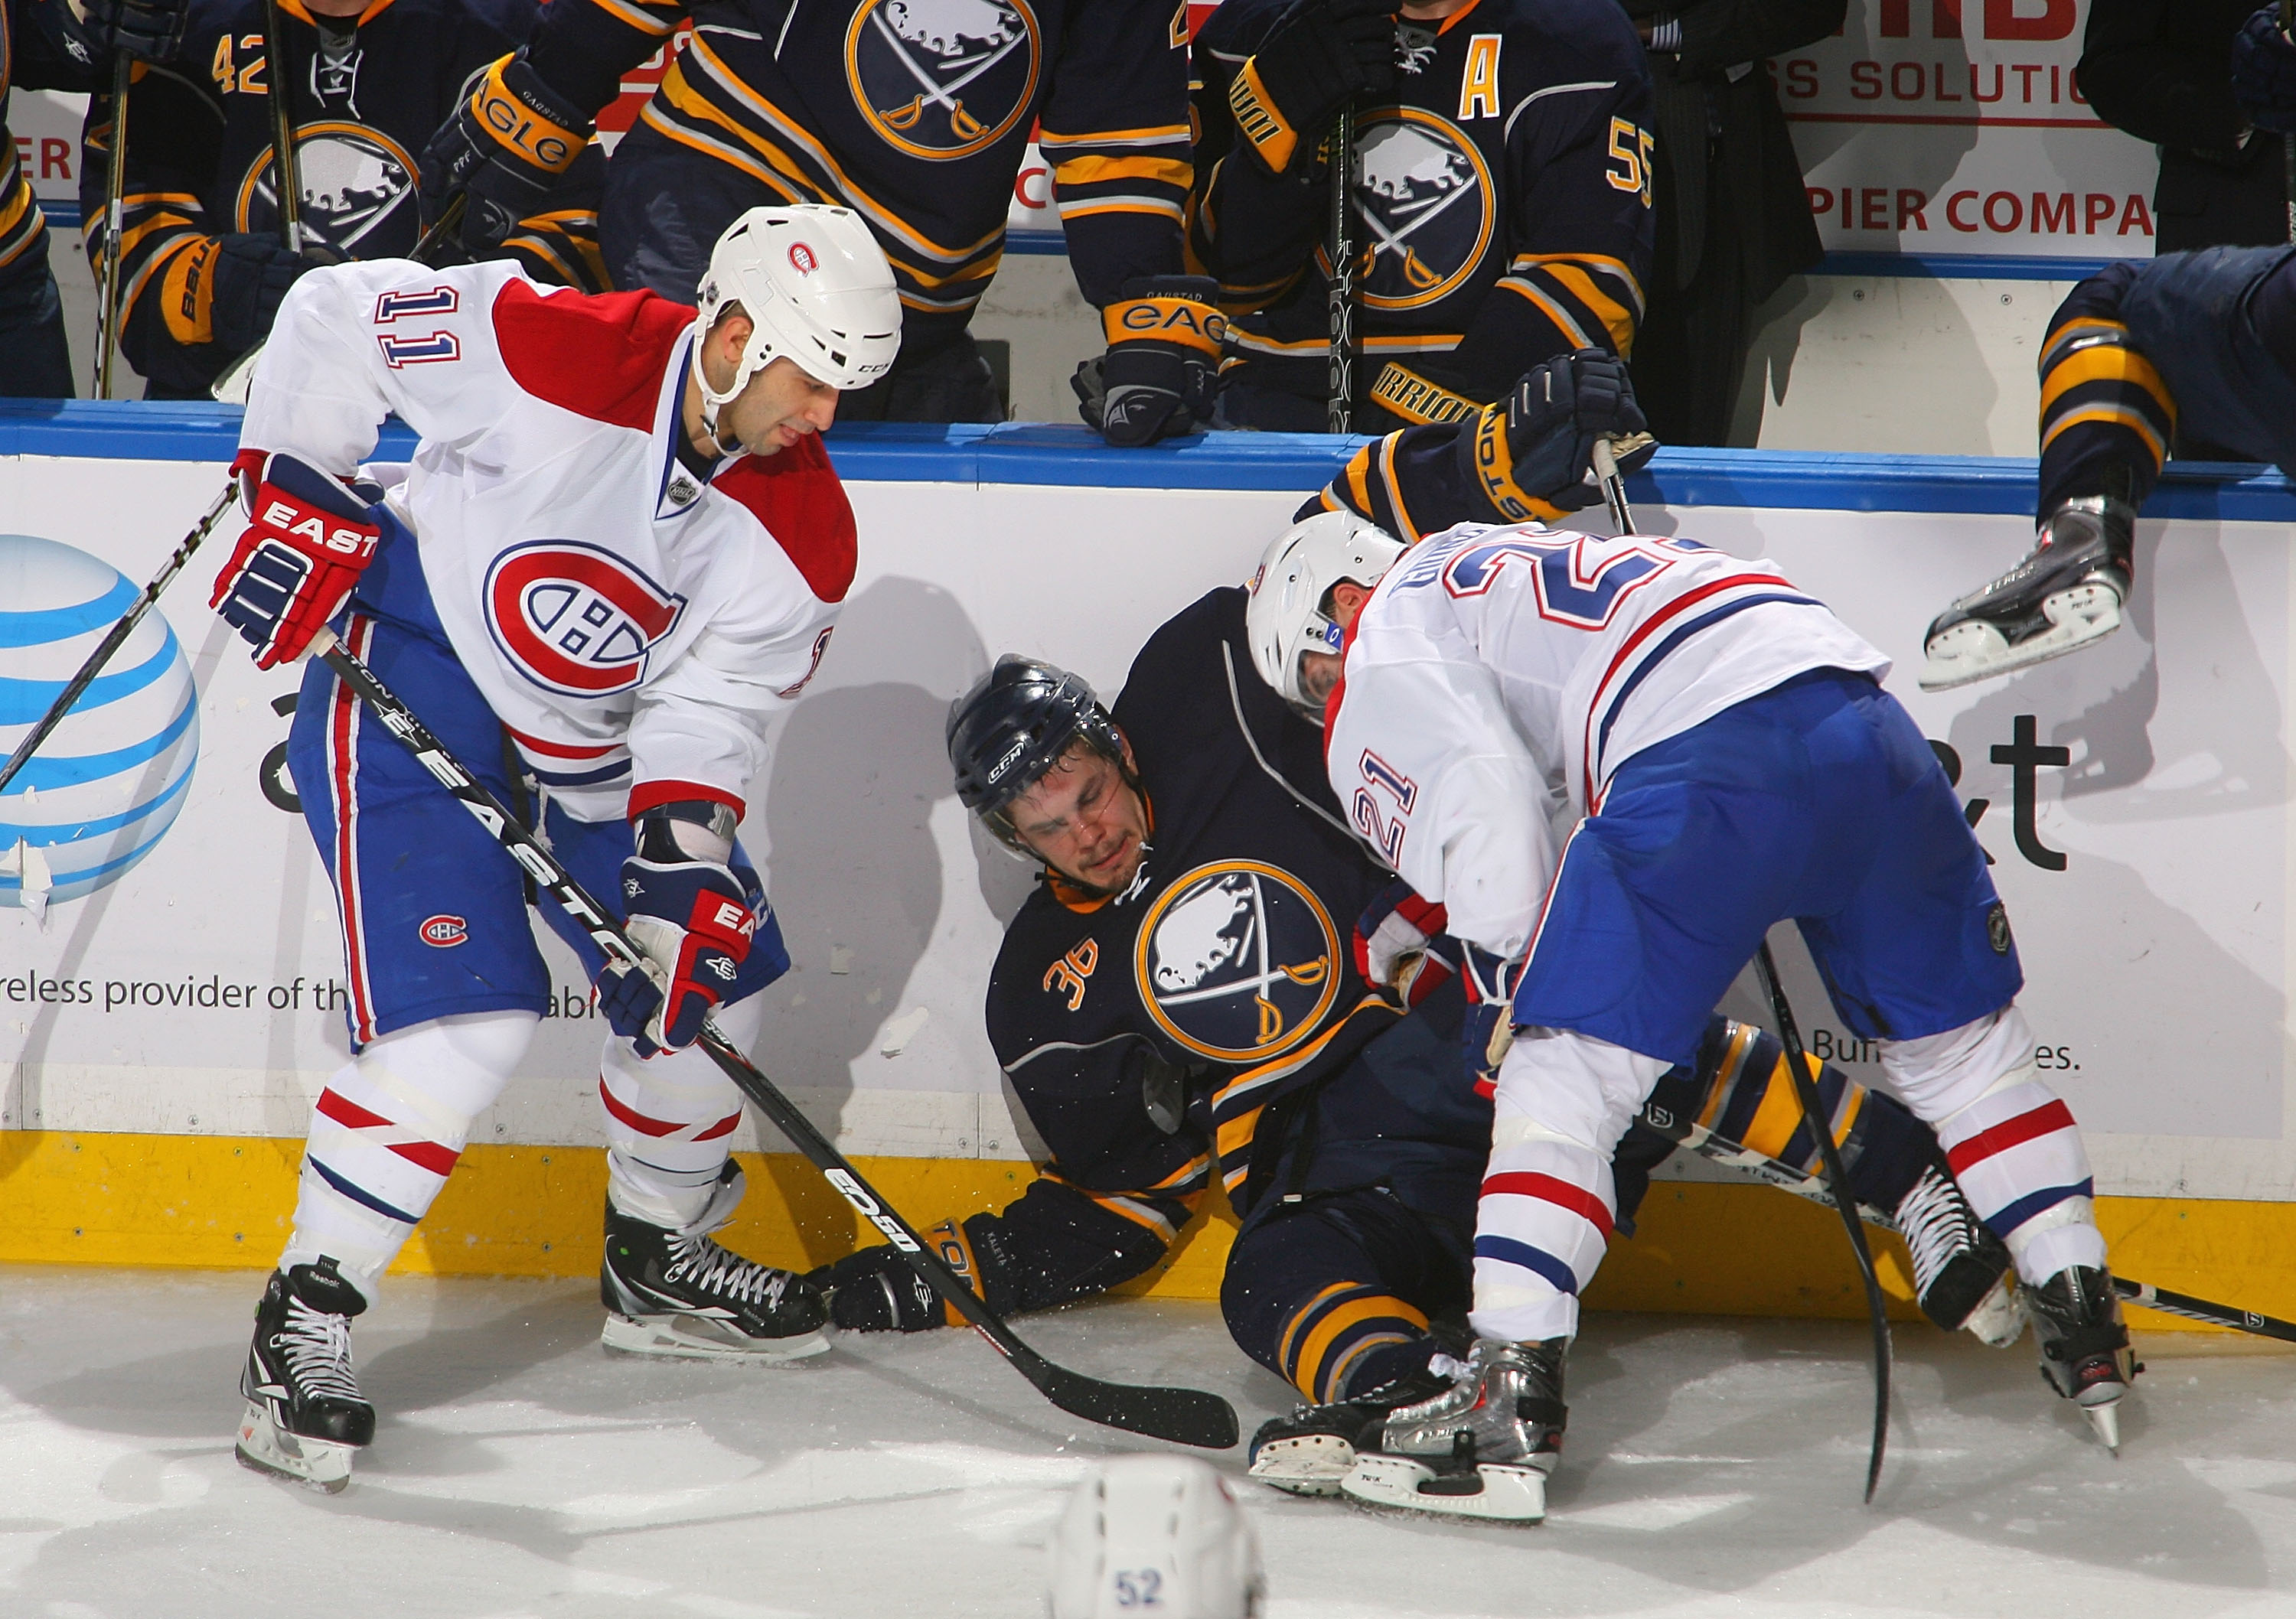 BUFFALO, NY - JANUARY 18: Scott Gomez #11 and Brian Gionta #21 of the Montreal Canadiens trap Patrick Kaleta #36 of the Buffalo Sabres against the boards at HSBC Arena on January 18, 2011 in Buffalo, New York.  (Photo by Rick Stewart/Getty Images)